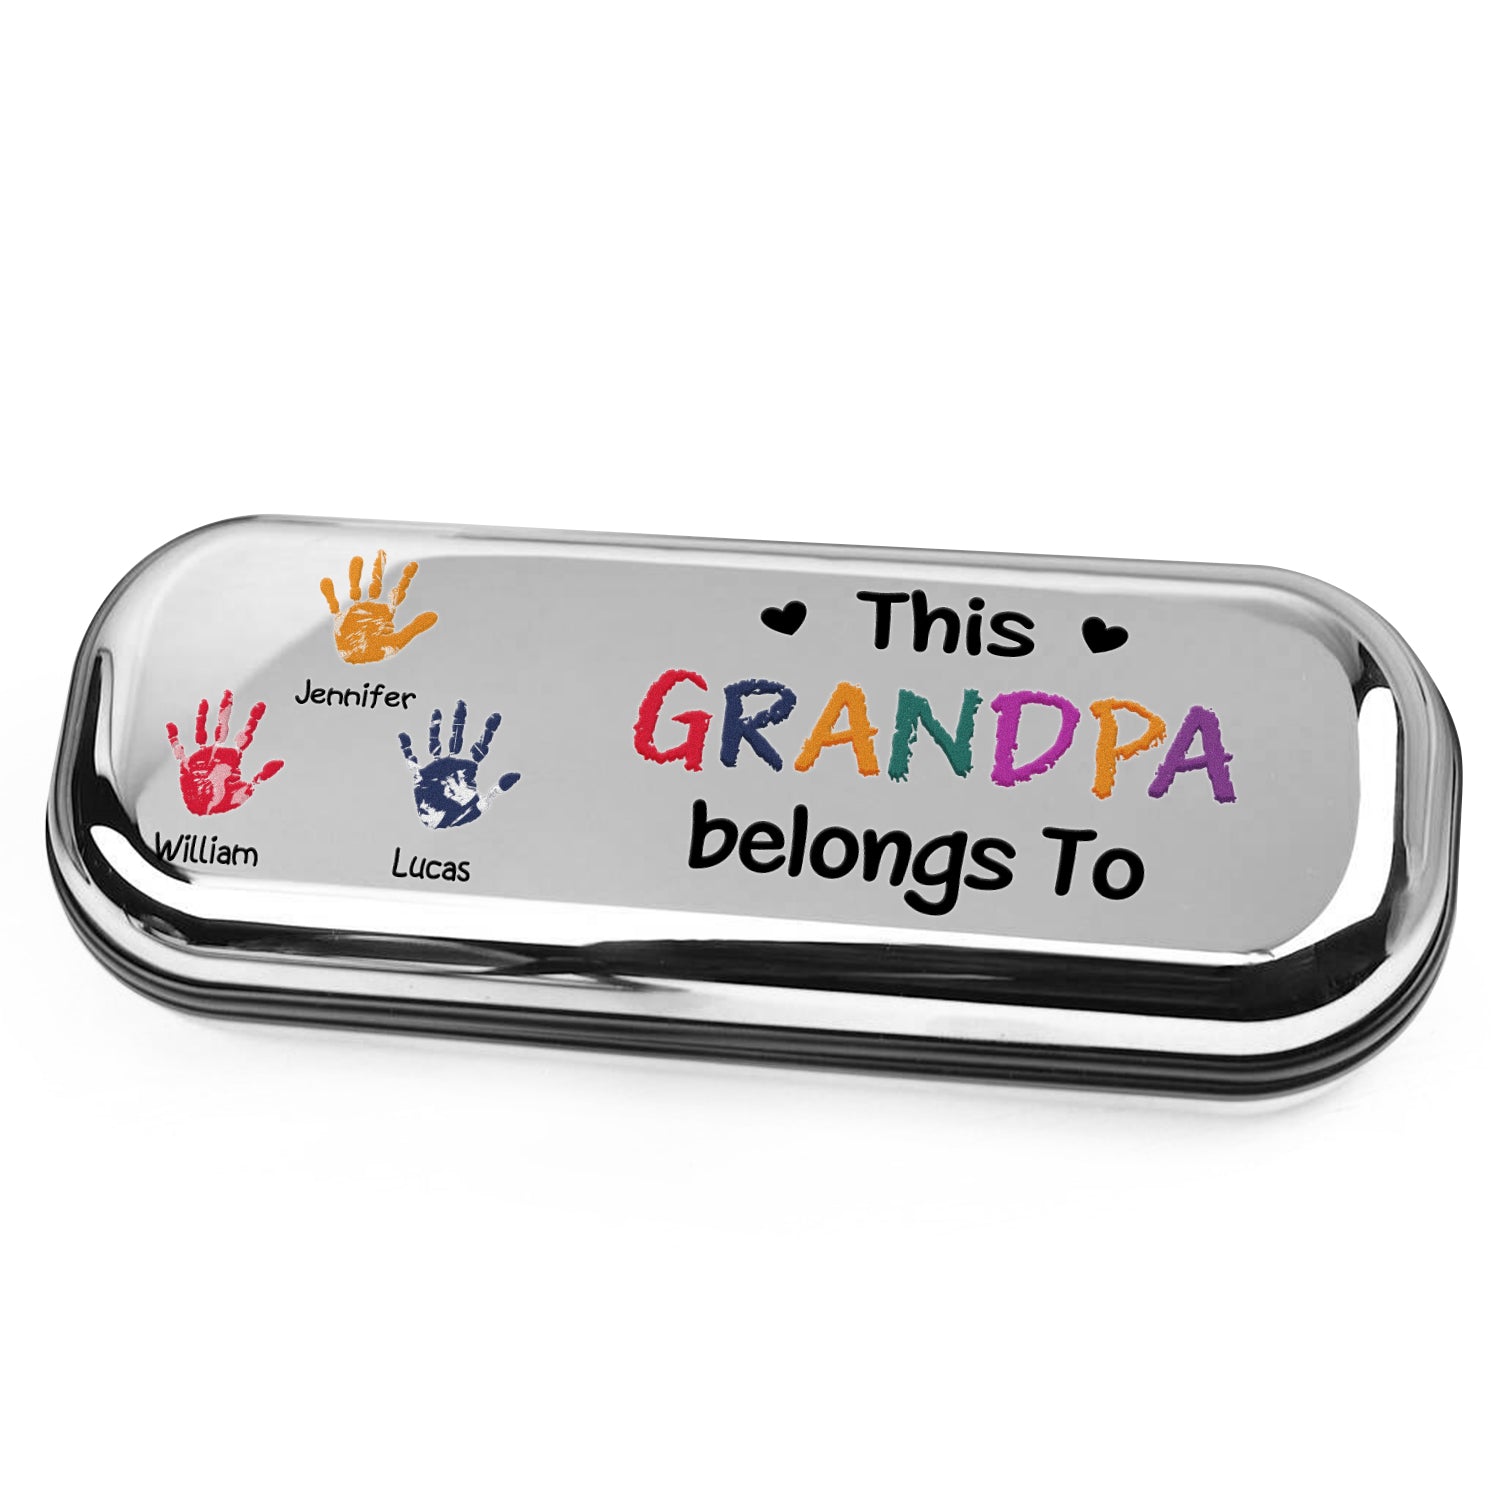 This Grandpa Belongs To Hand Print - Personalized Chrome Glasses Case Box